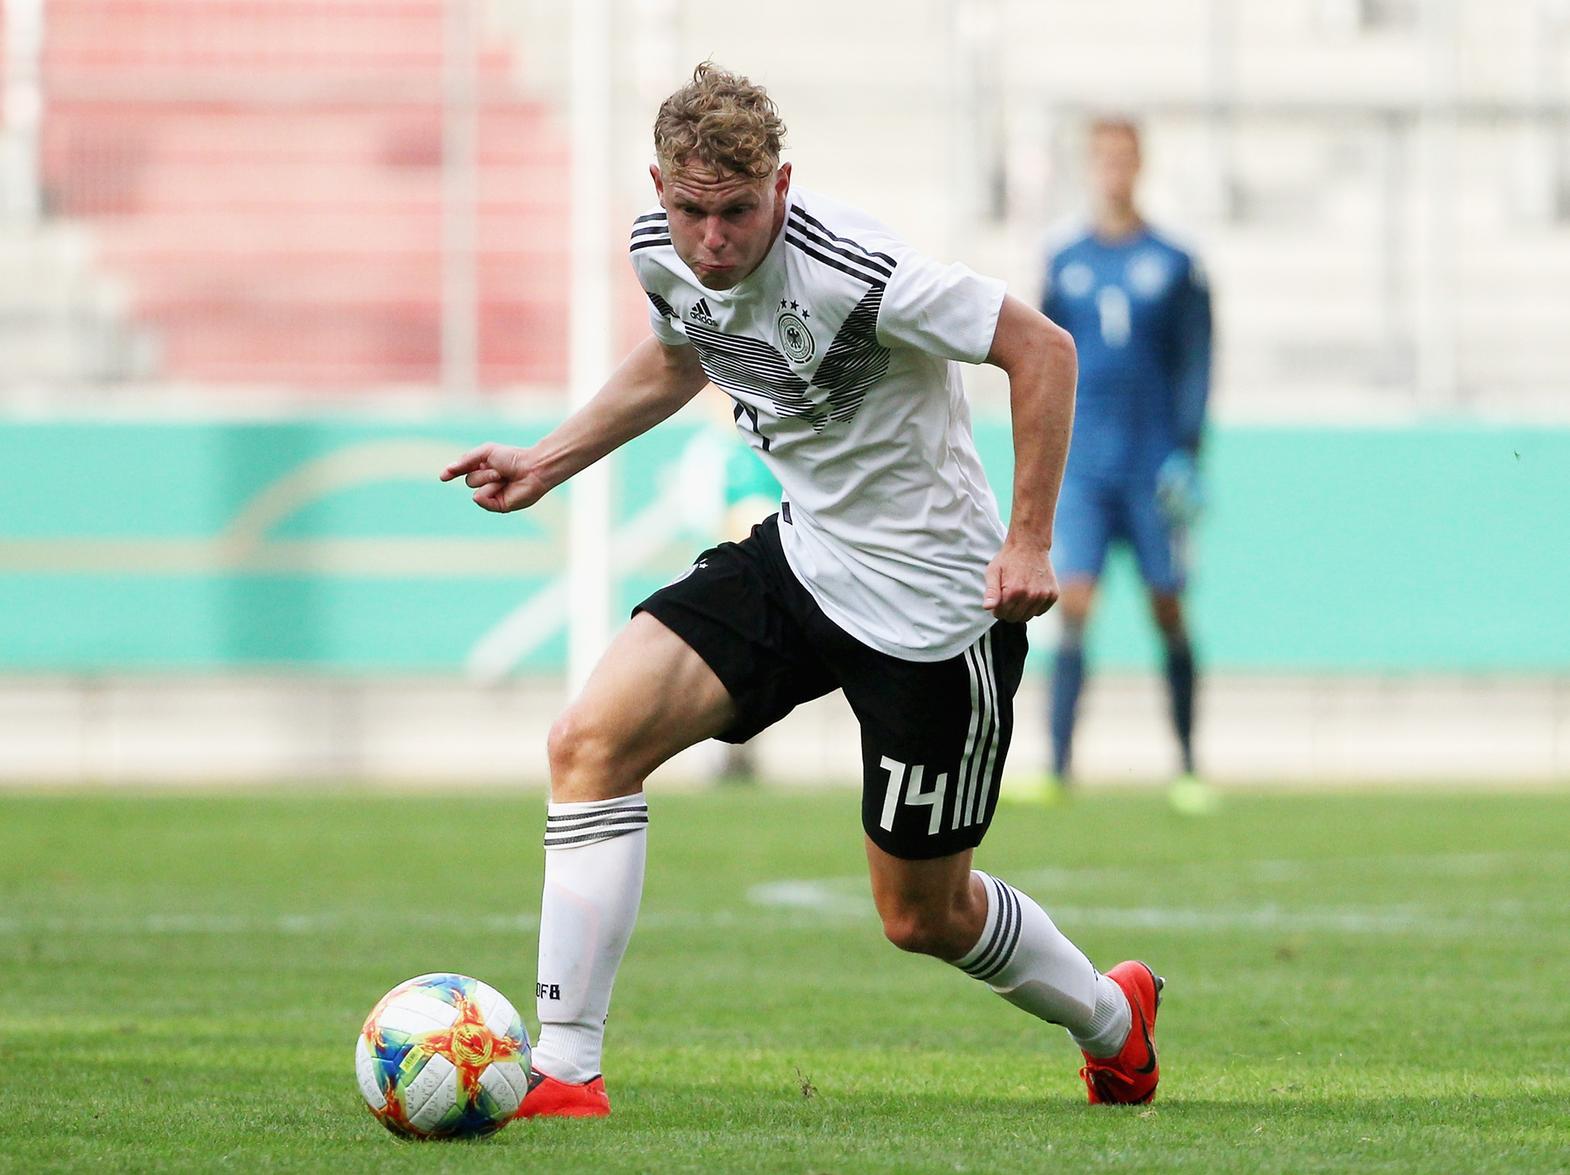 RB Salzburg full-back joined on loan early in January. The teenage German U20 international has made one start and two substitute appearance since arriving at Oakwell.